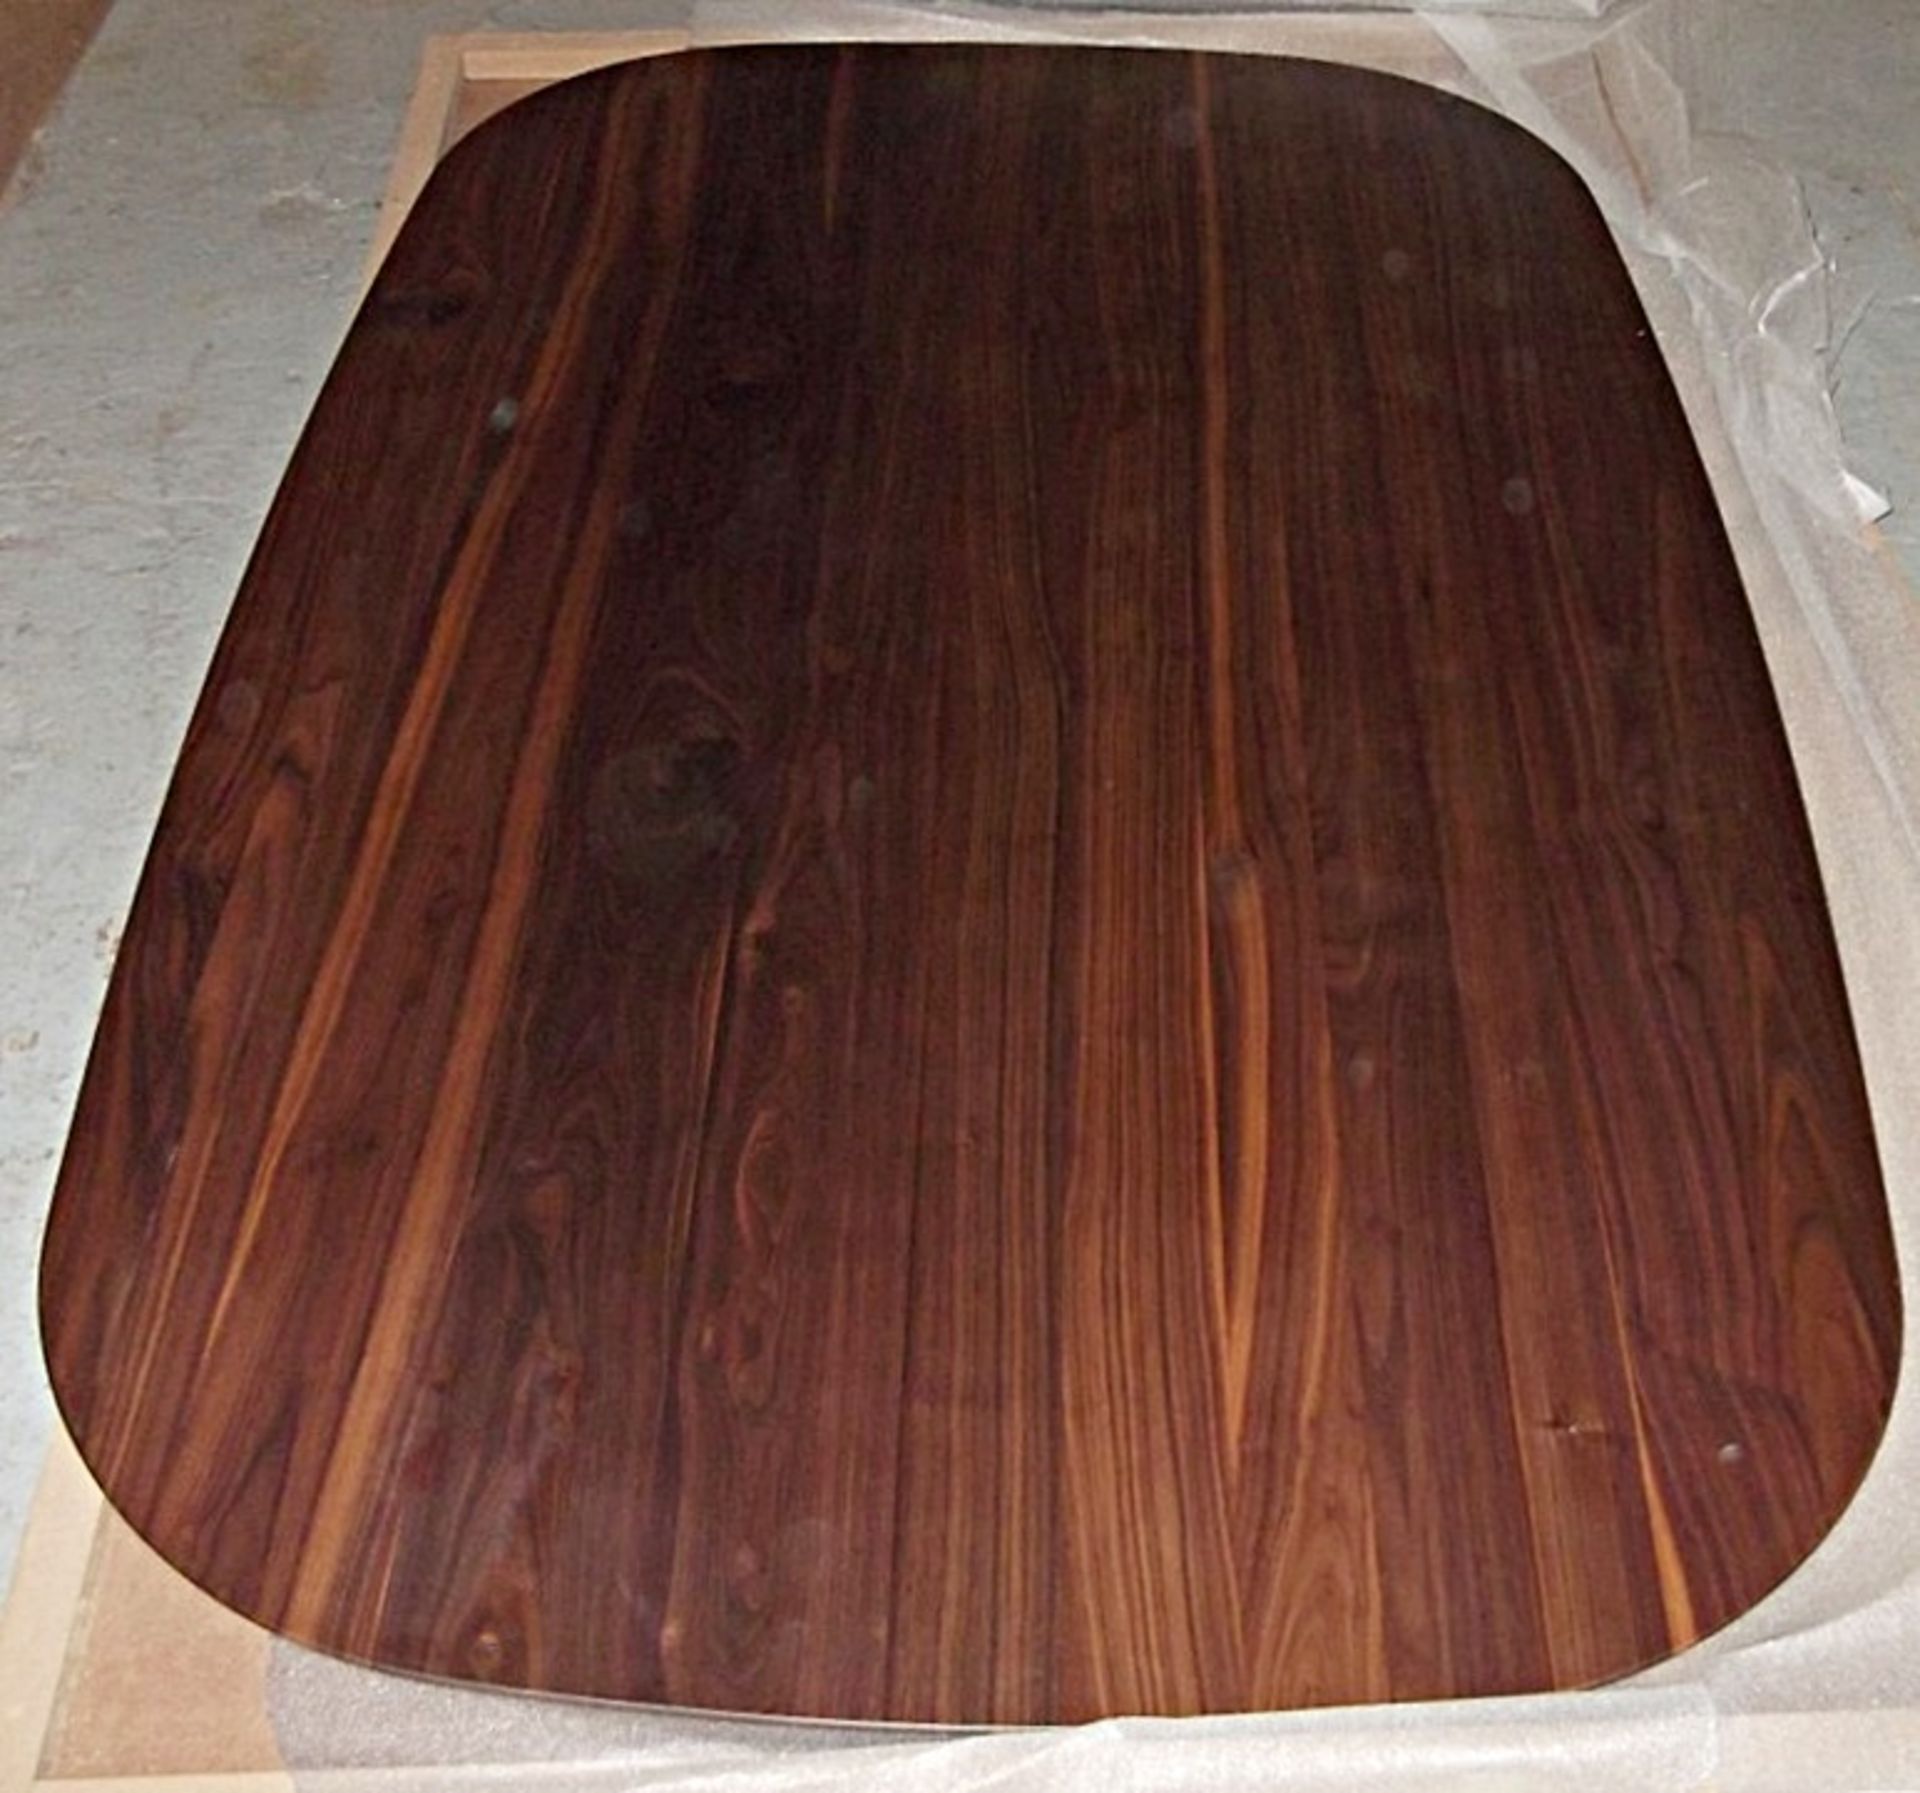 1 x PORADA Infinity (Wooden Table Top Only) - Ref: 4760067 - CL087 - Location: Altrincham WA14 -